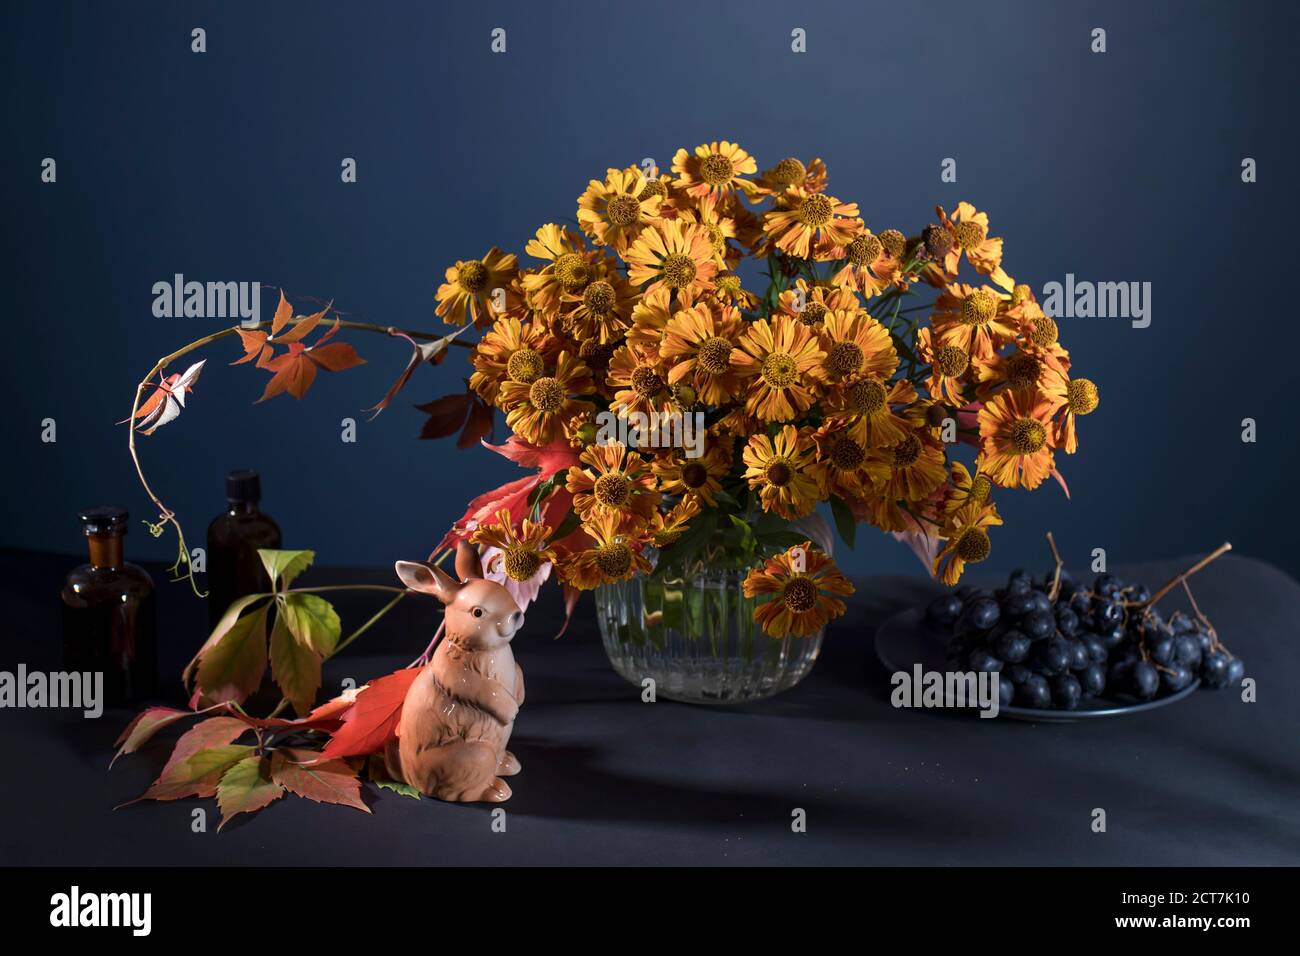 A bouquet of orange helenium with wild grape leaves in a fluted glass vase against a dark blue wall. Porcelain figurine of a hare. Stock Photo